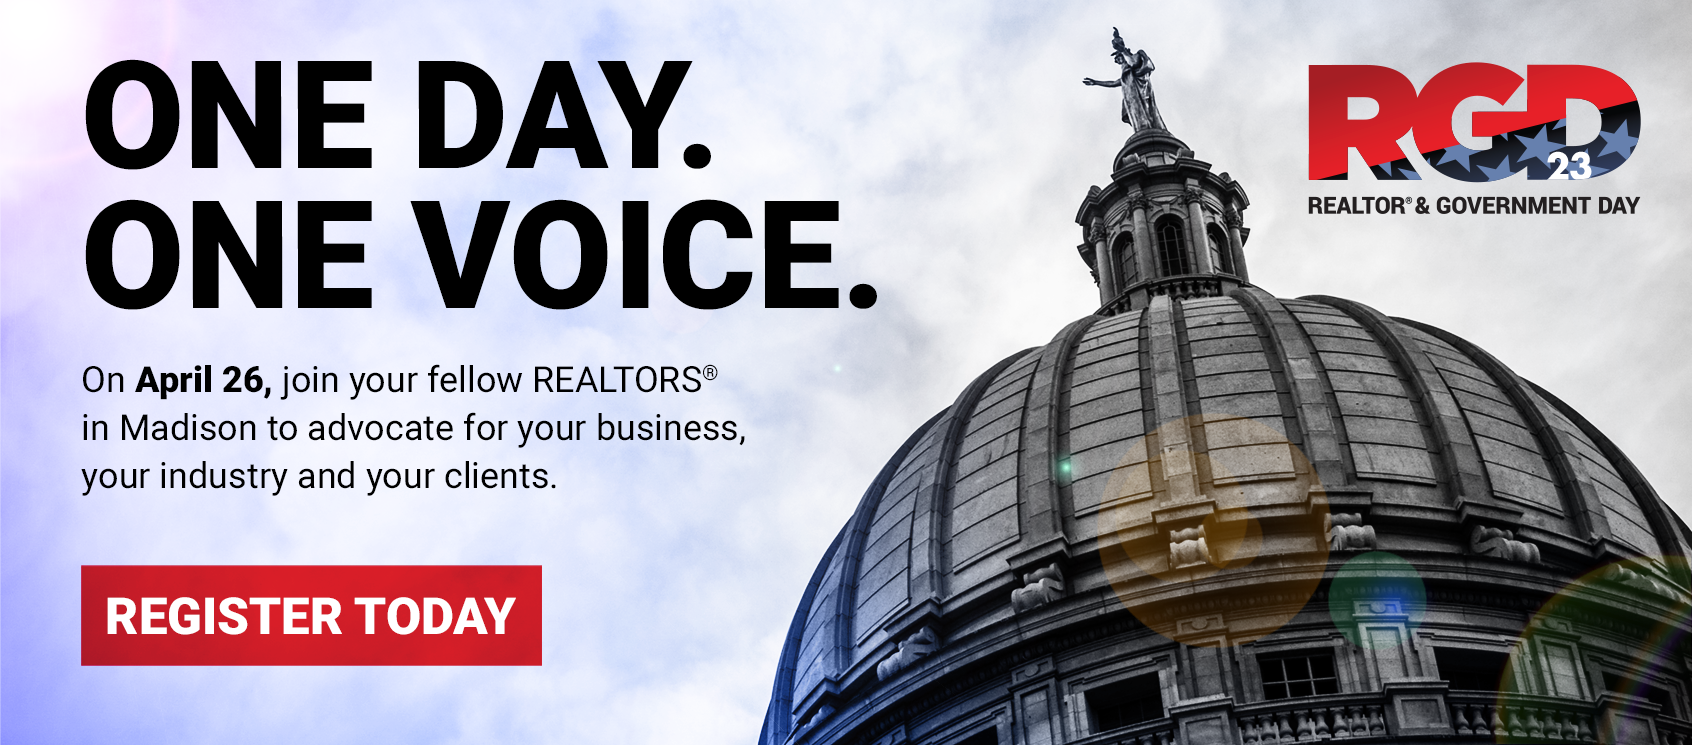 2023 REALTOR® & GOVERNMENT DAY - ONE DAY. ONE VOICE.